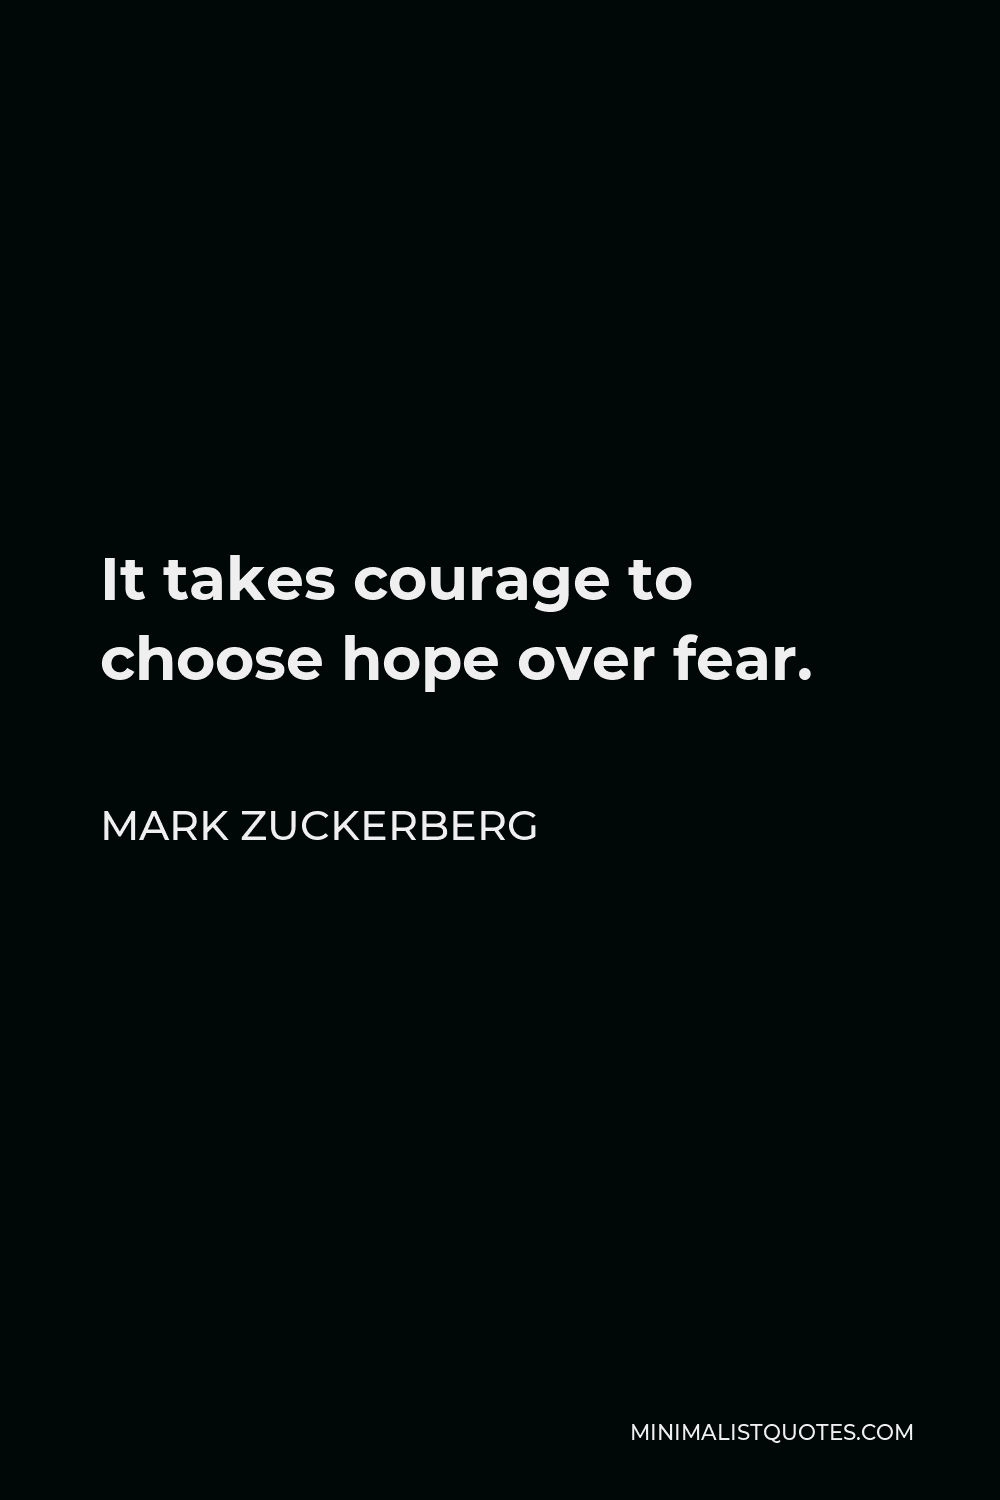 Mark Zuckerberg Quote - It takes courage to choose hope over fear.